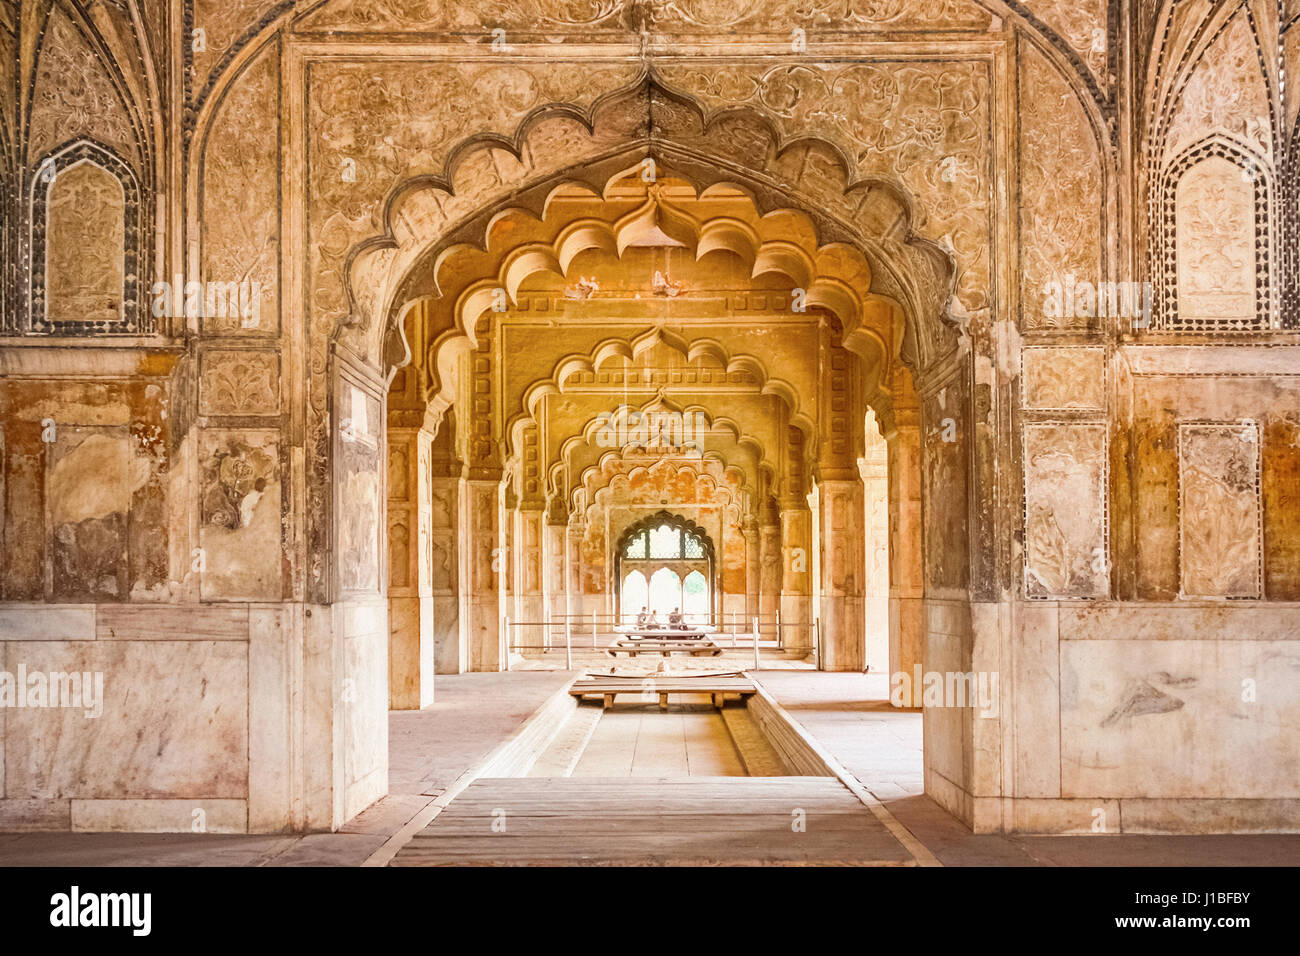 Ornate arcade at the Red Fort of Delhi, India. Together with the Salimgarh Fort it forms UNESCO World Heritage Site. Stock Photo